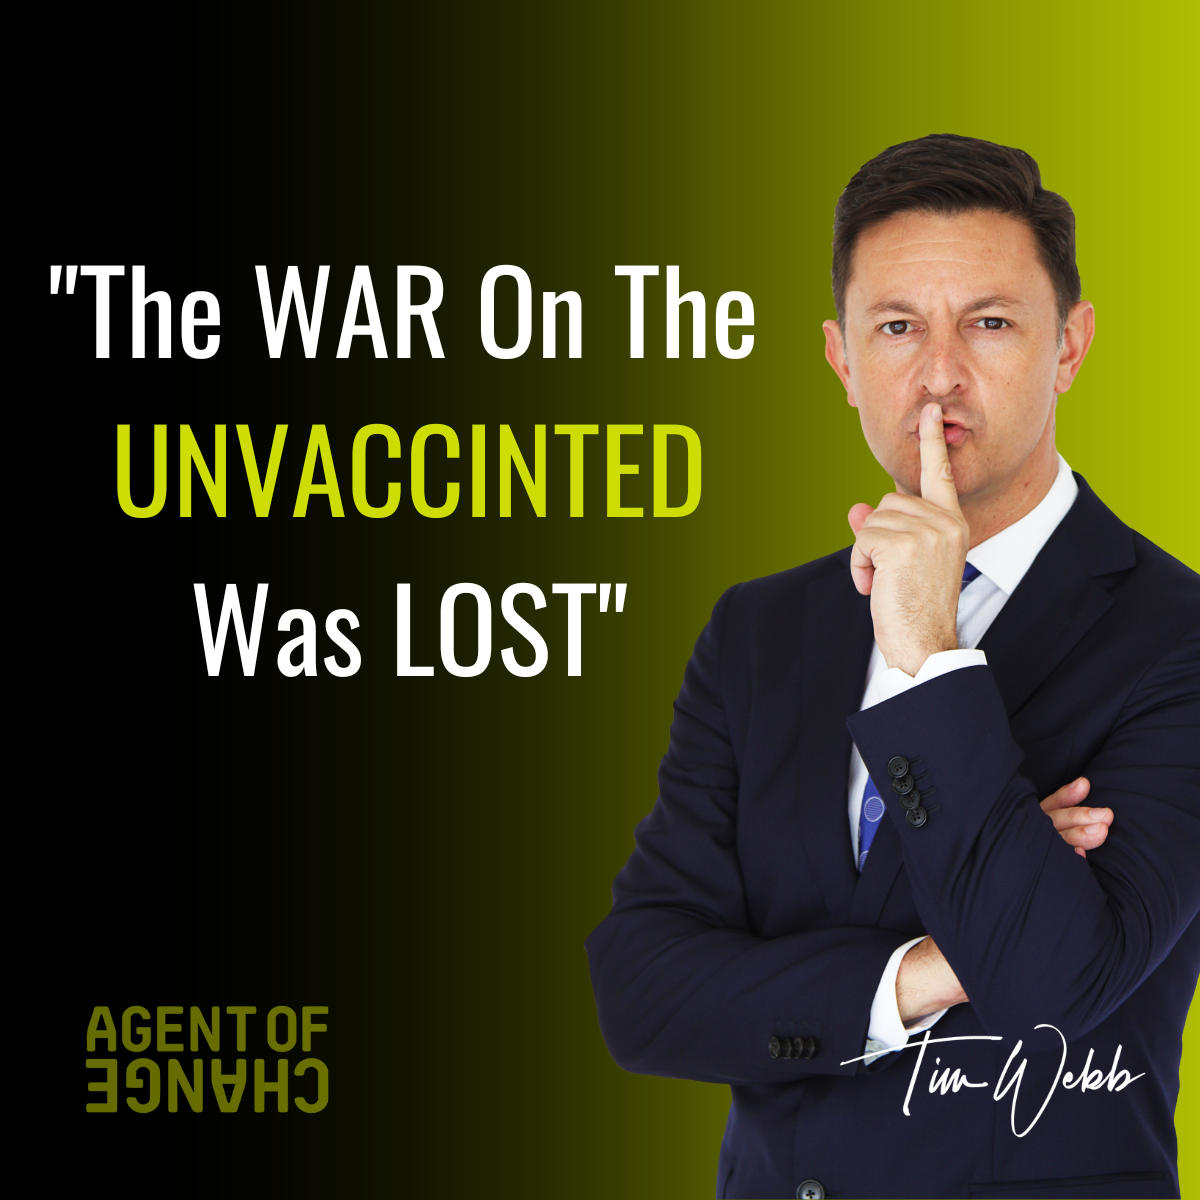 The War On The UNVACCINATED ... Was Lost